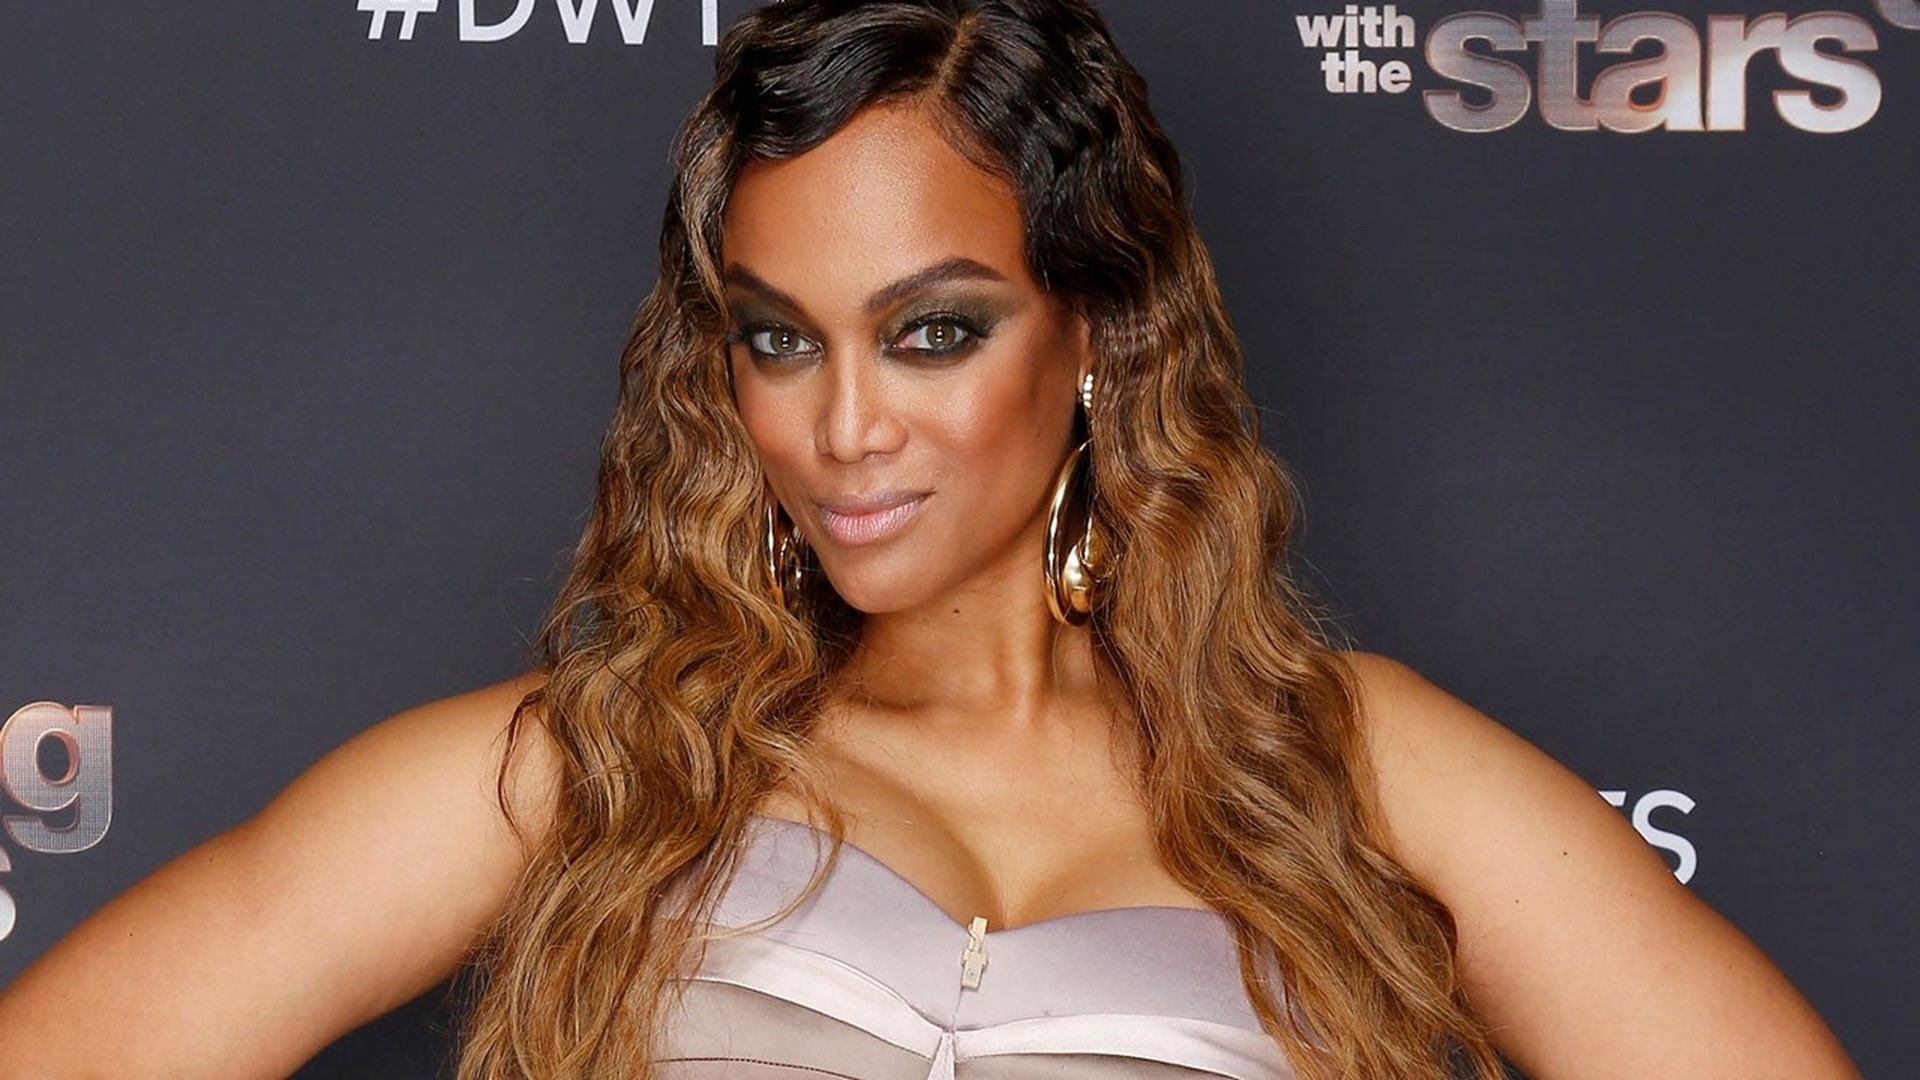 'DWTS' Tyra Banks Reveals Her Dream Contestant and What She'd Do